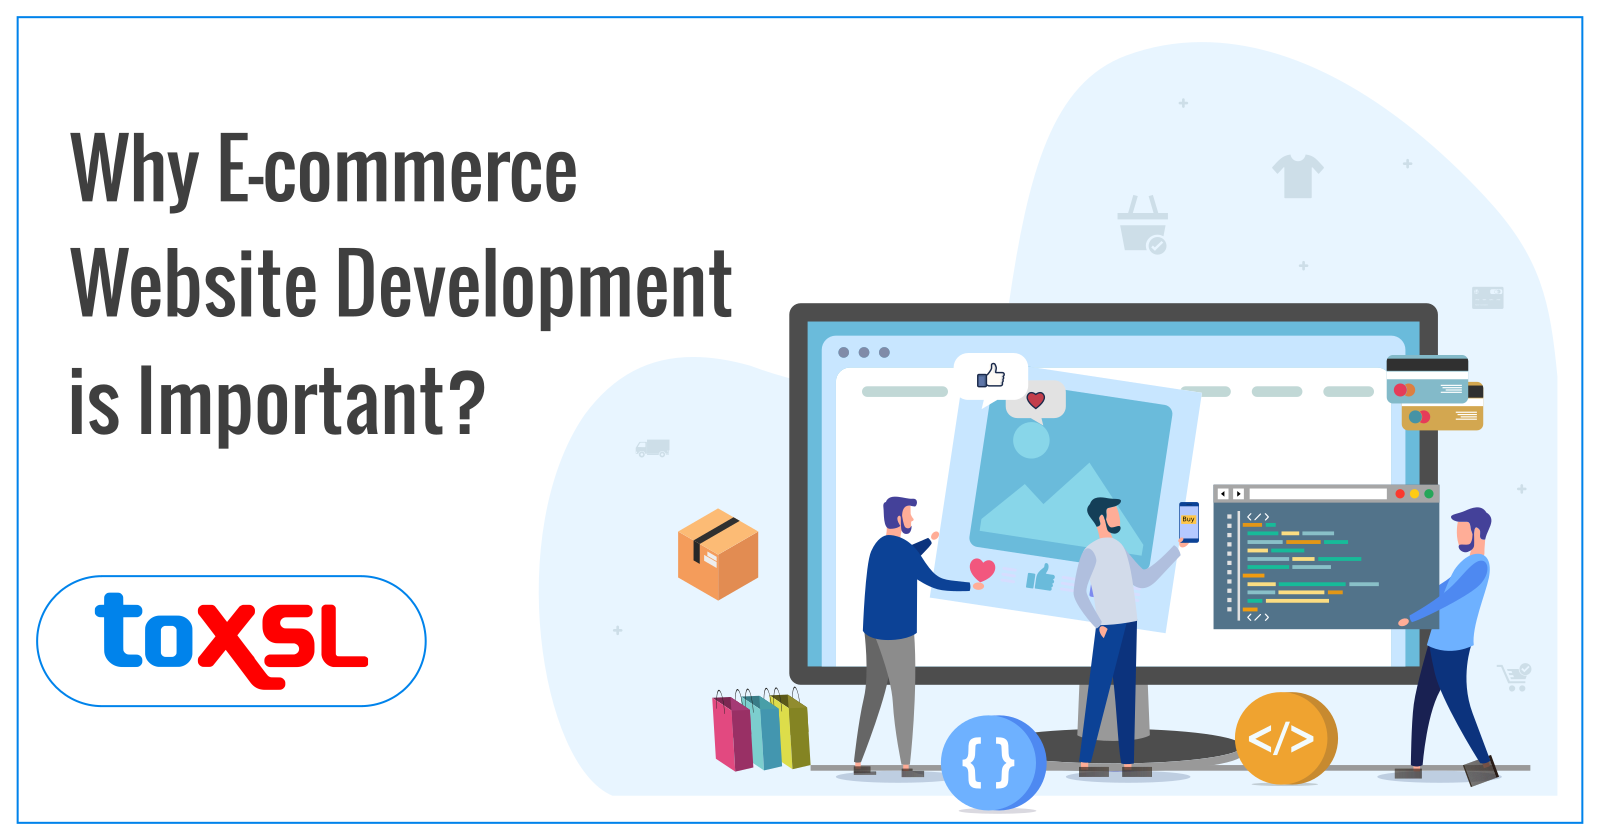 Why E-commerce Website Development Is Important?